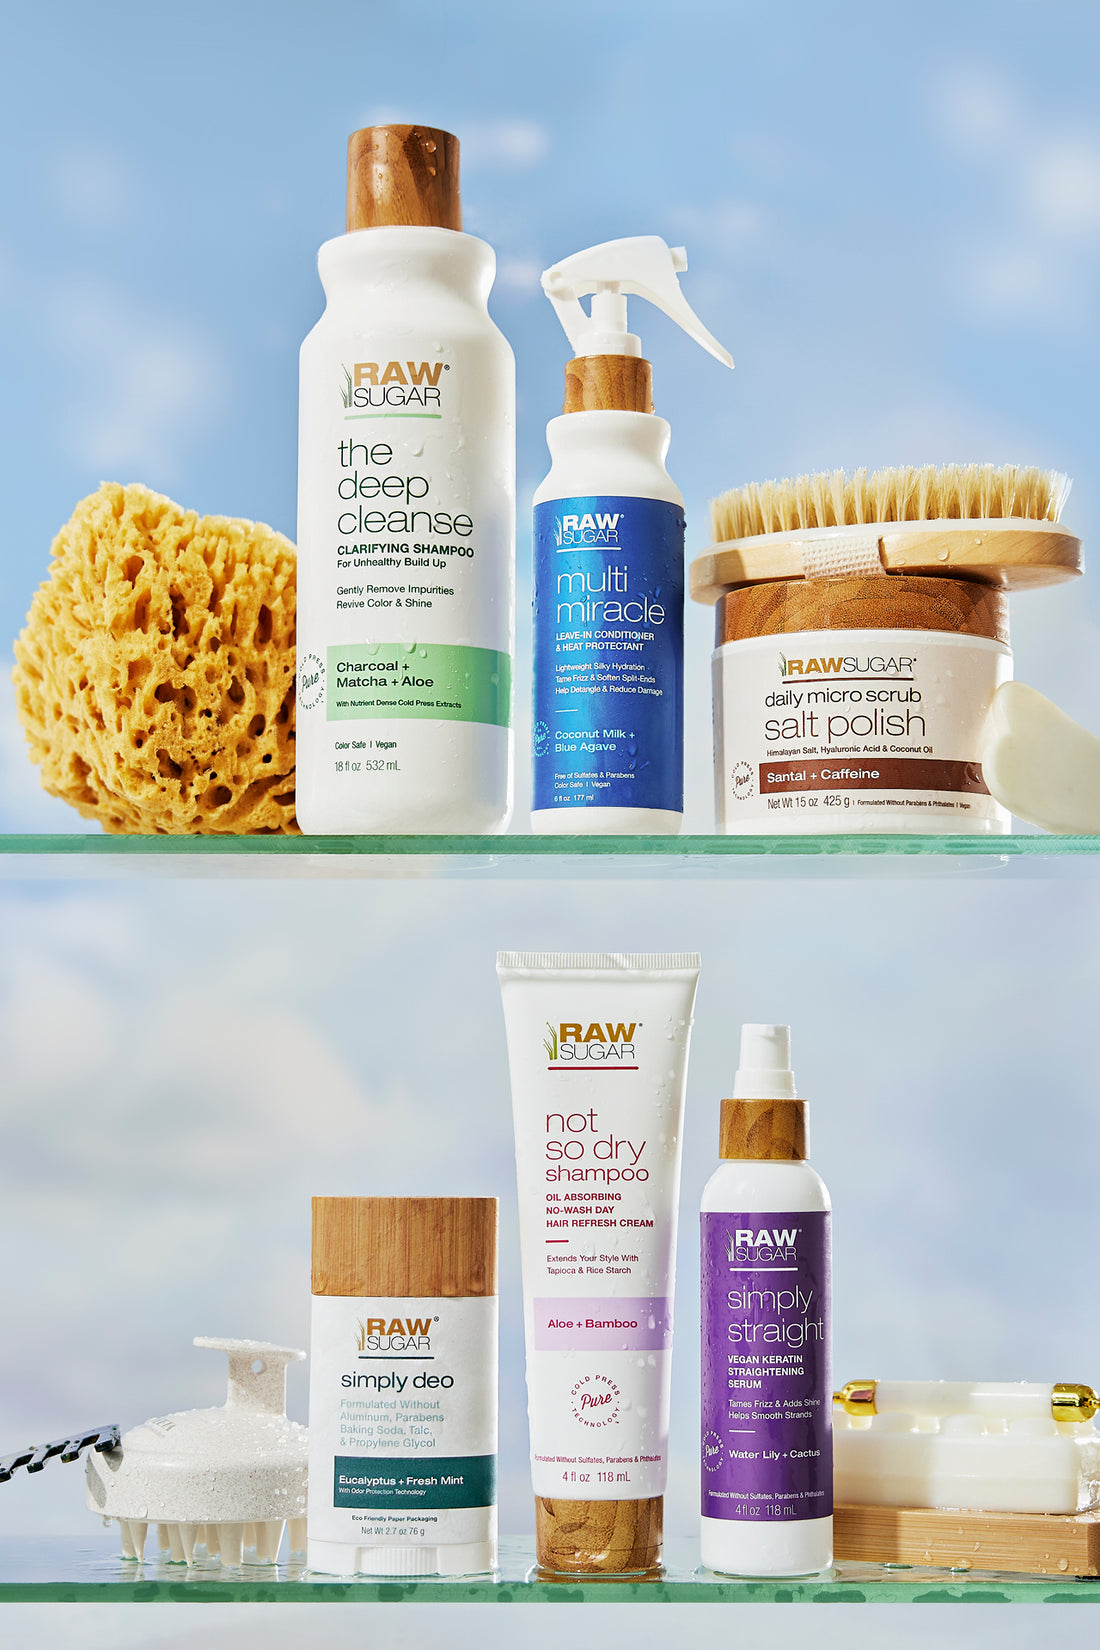 top shelf image of vegan personal care products